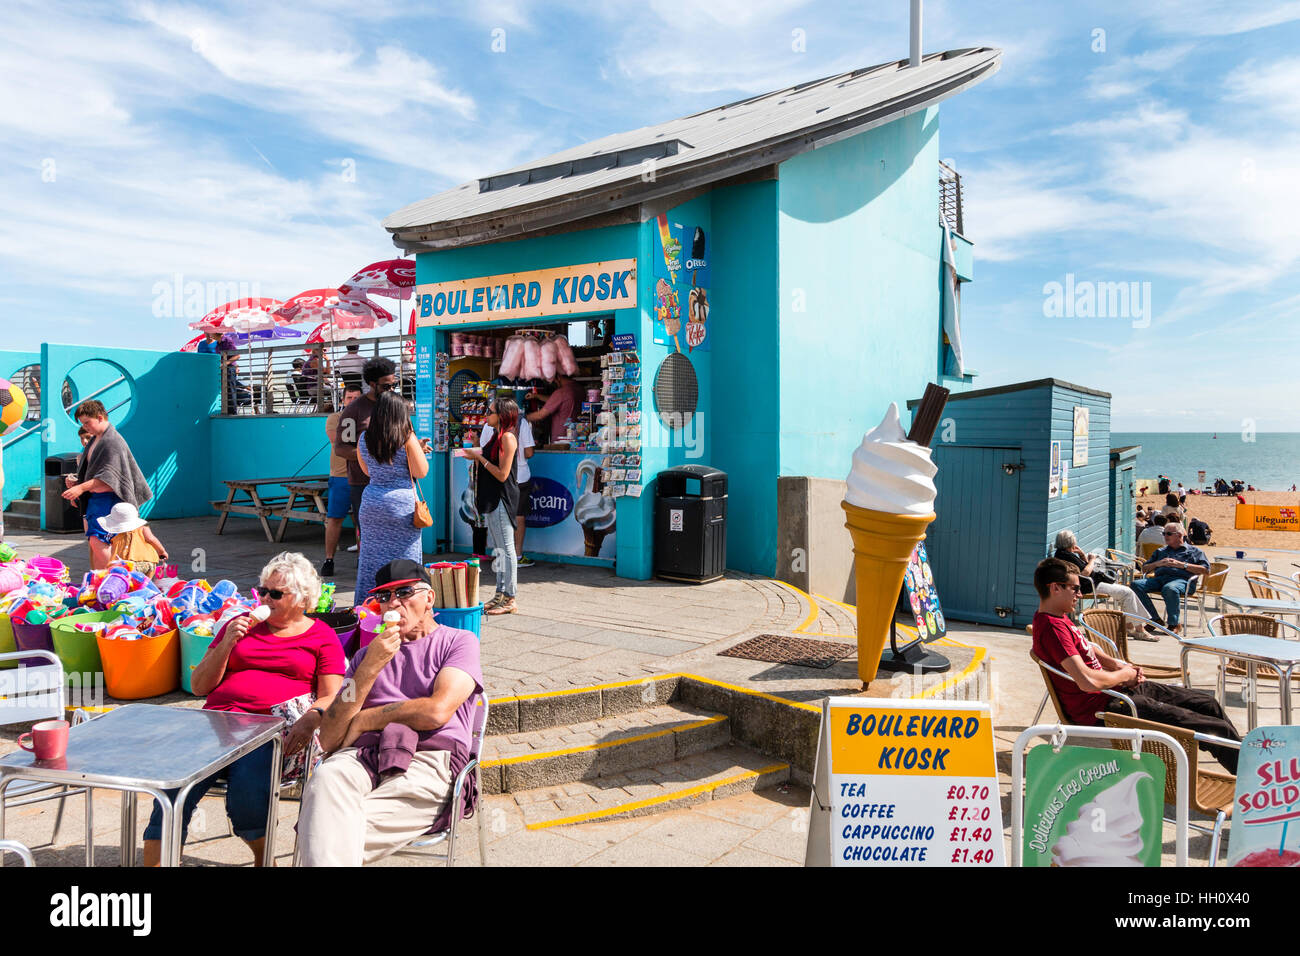 England, Ramsgate. People sitting with ice creams outside small blue kiosk on seafront in bright sunshine during summer heatwave Stock Photo